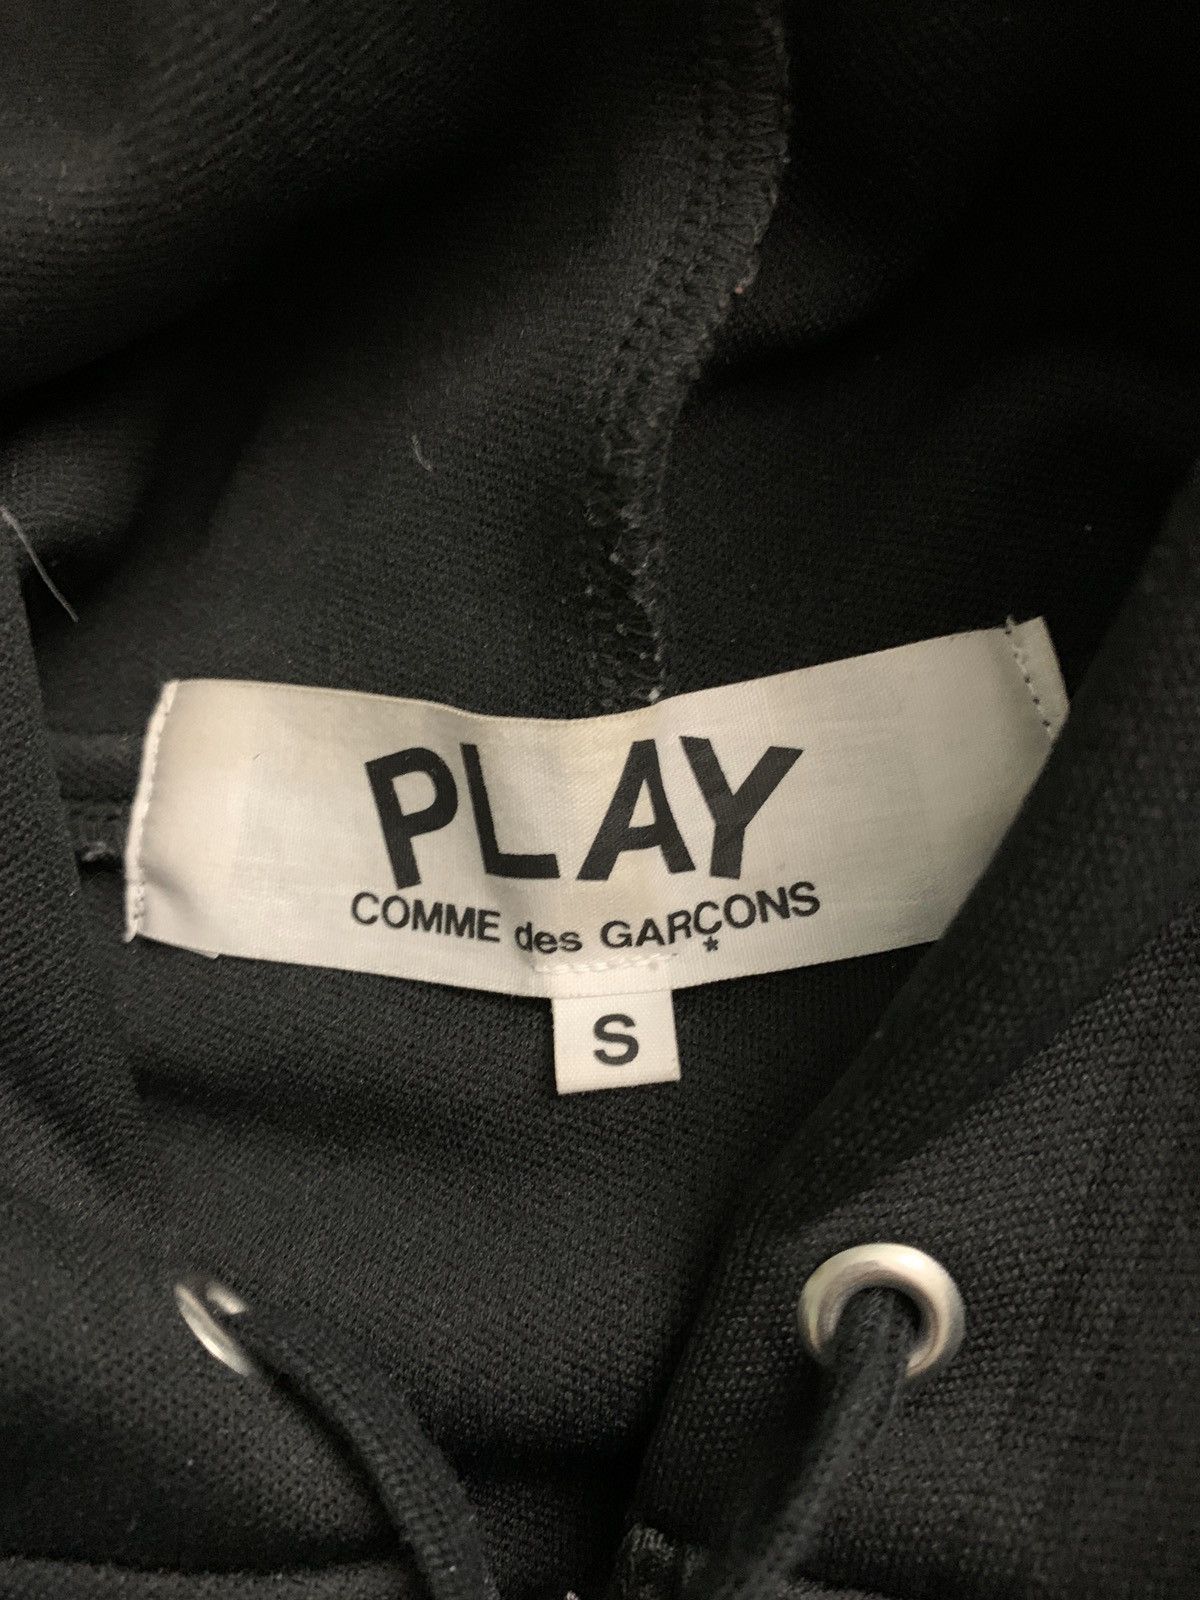 Comme Des Garcons Play CDG Play Black Heart Black Zip Up Hoodie Size US S / EU 44-46 / 1 - 3 Thumbnail